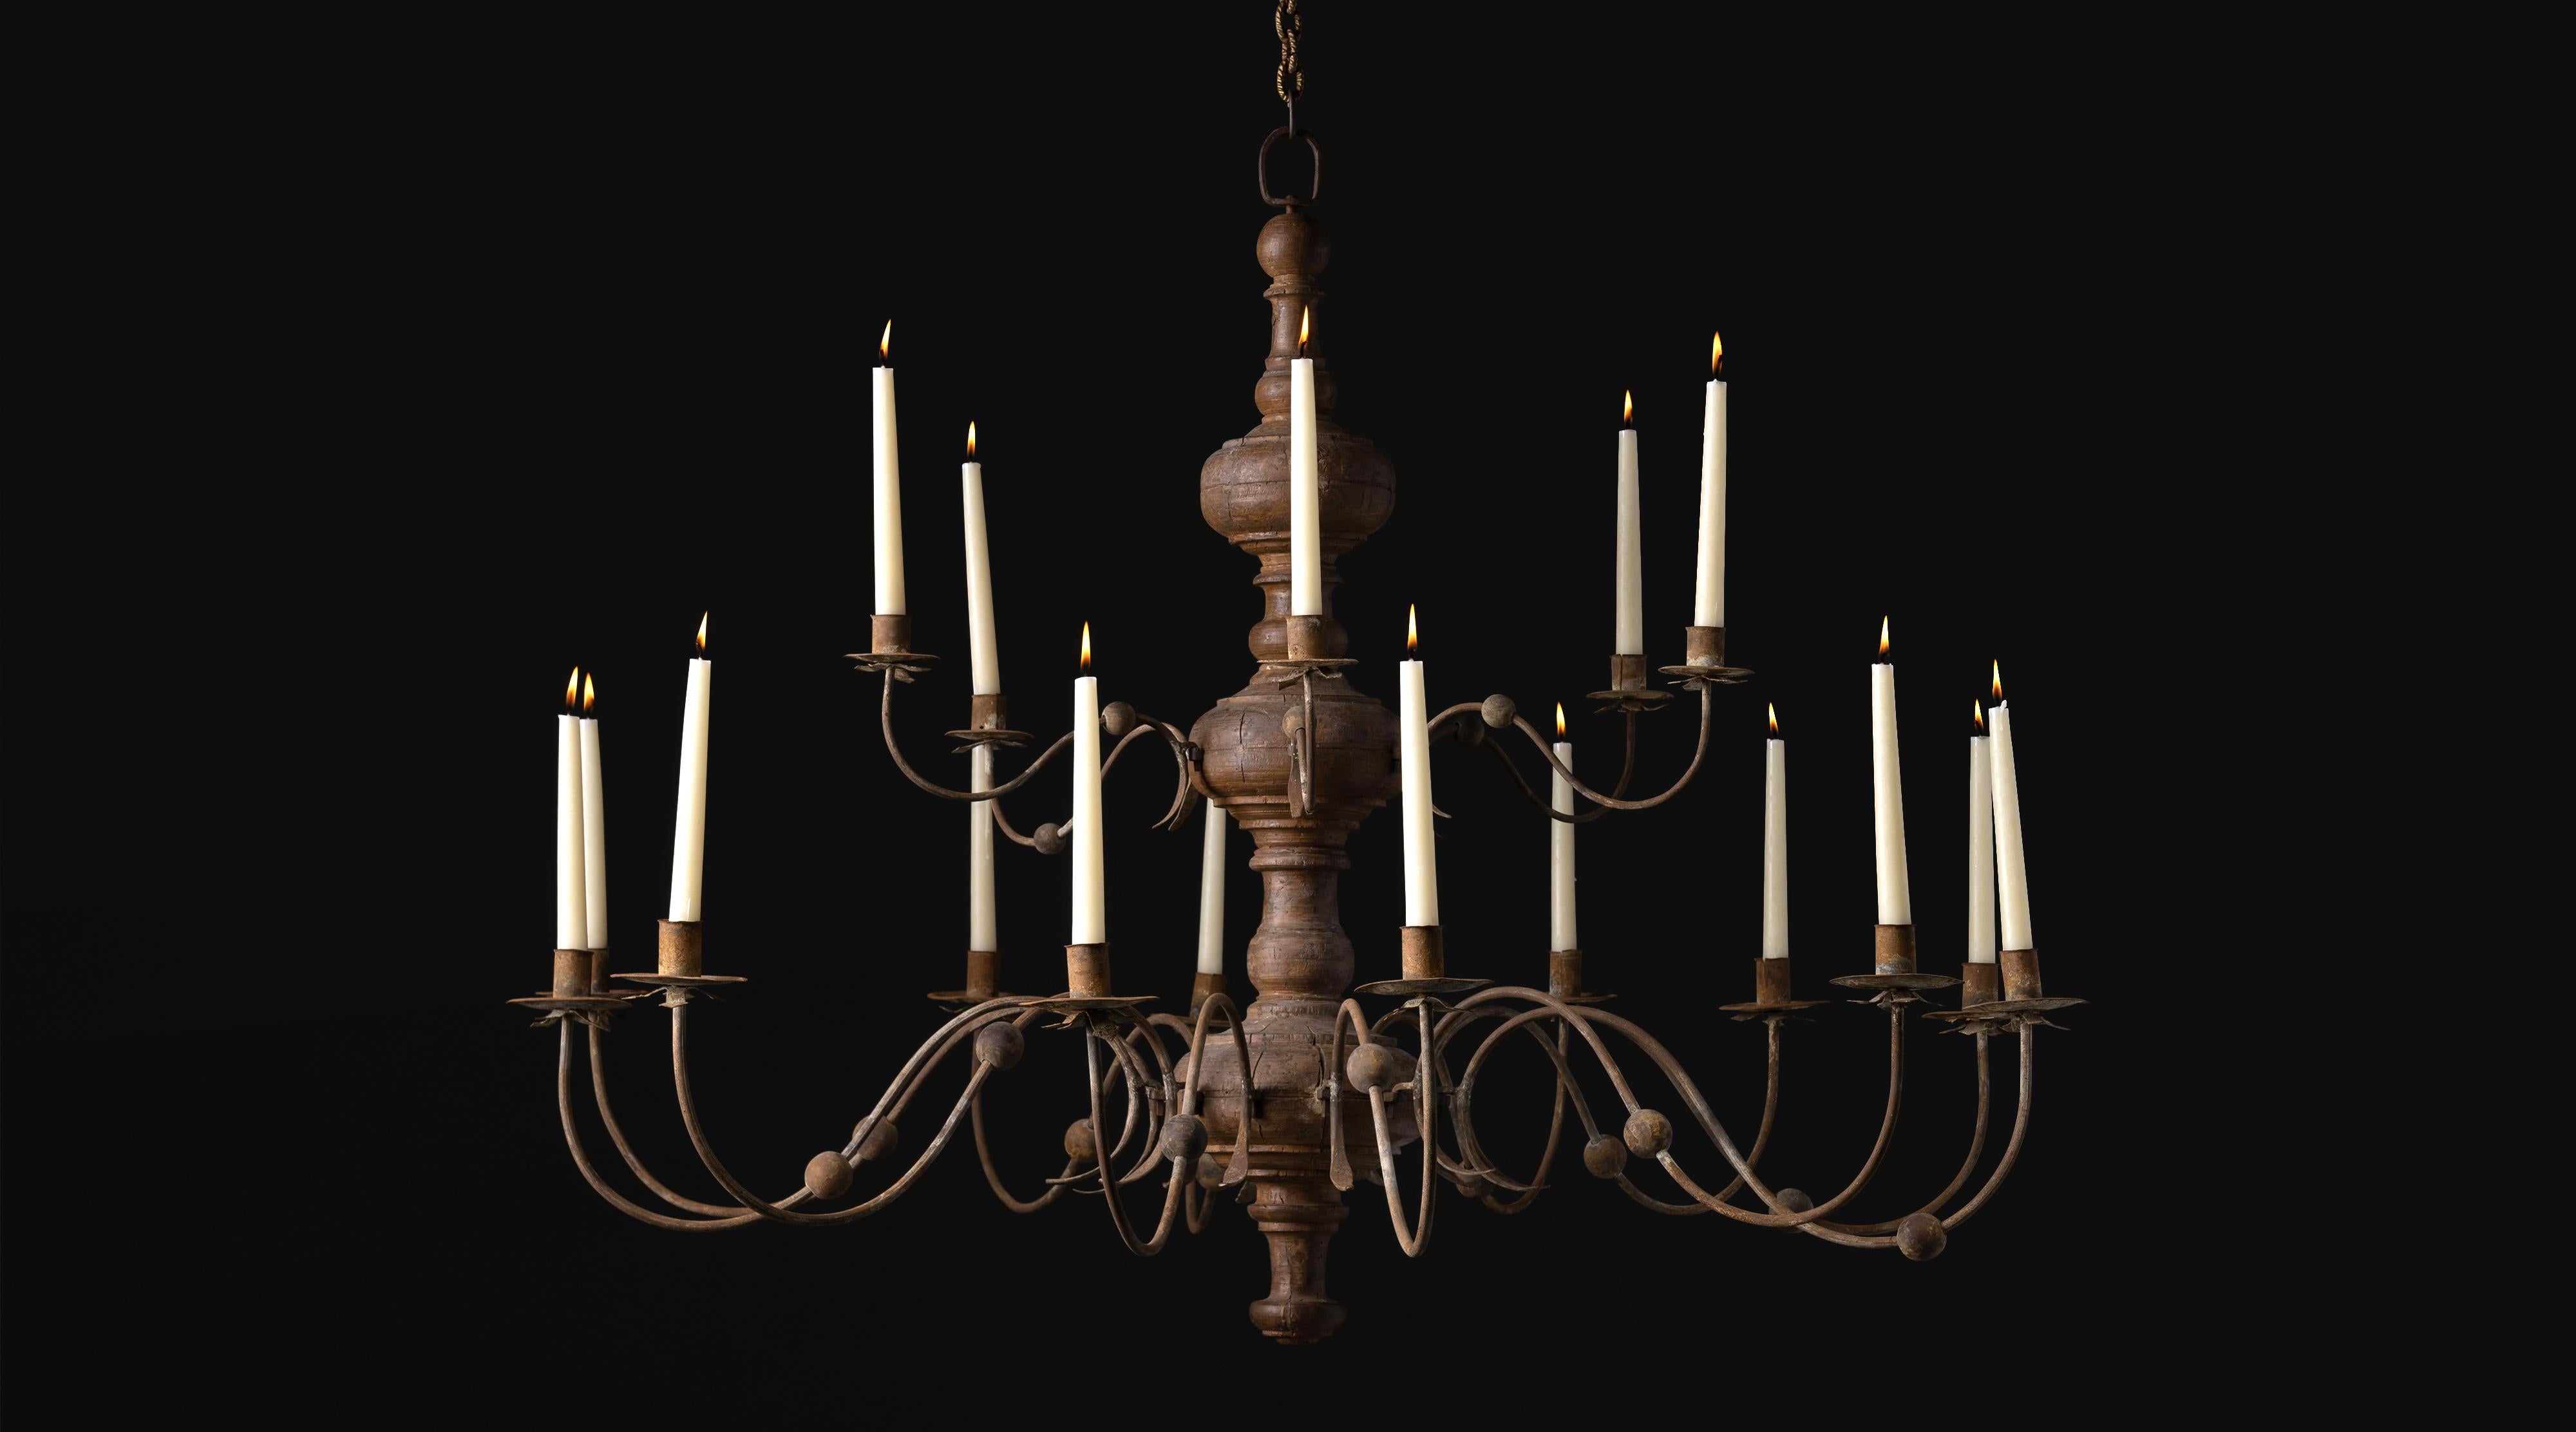 Monumental Wooden Candelabra, Italy circa 1840

Large chandelier with wooden spindle and 18 curved iron arms

Measures 48”dia x 25”H.